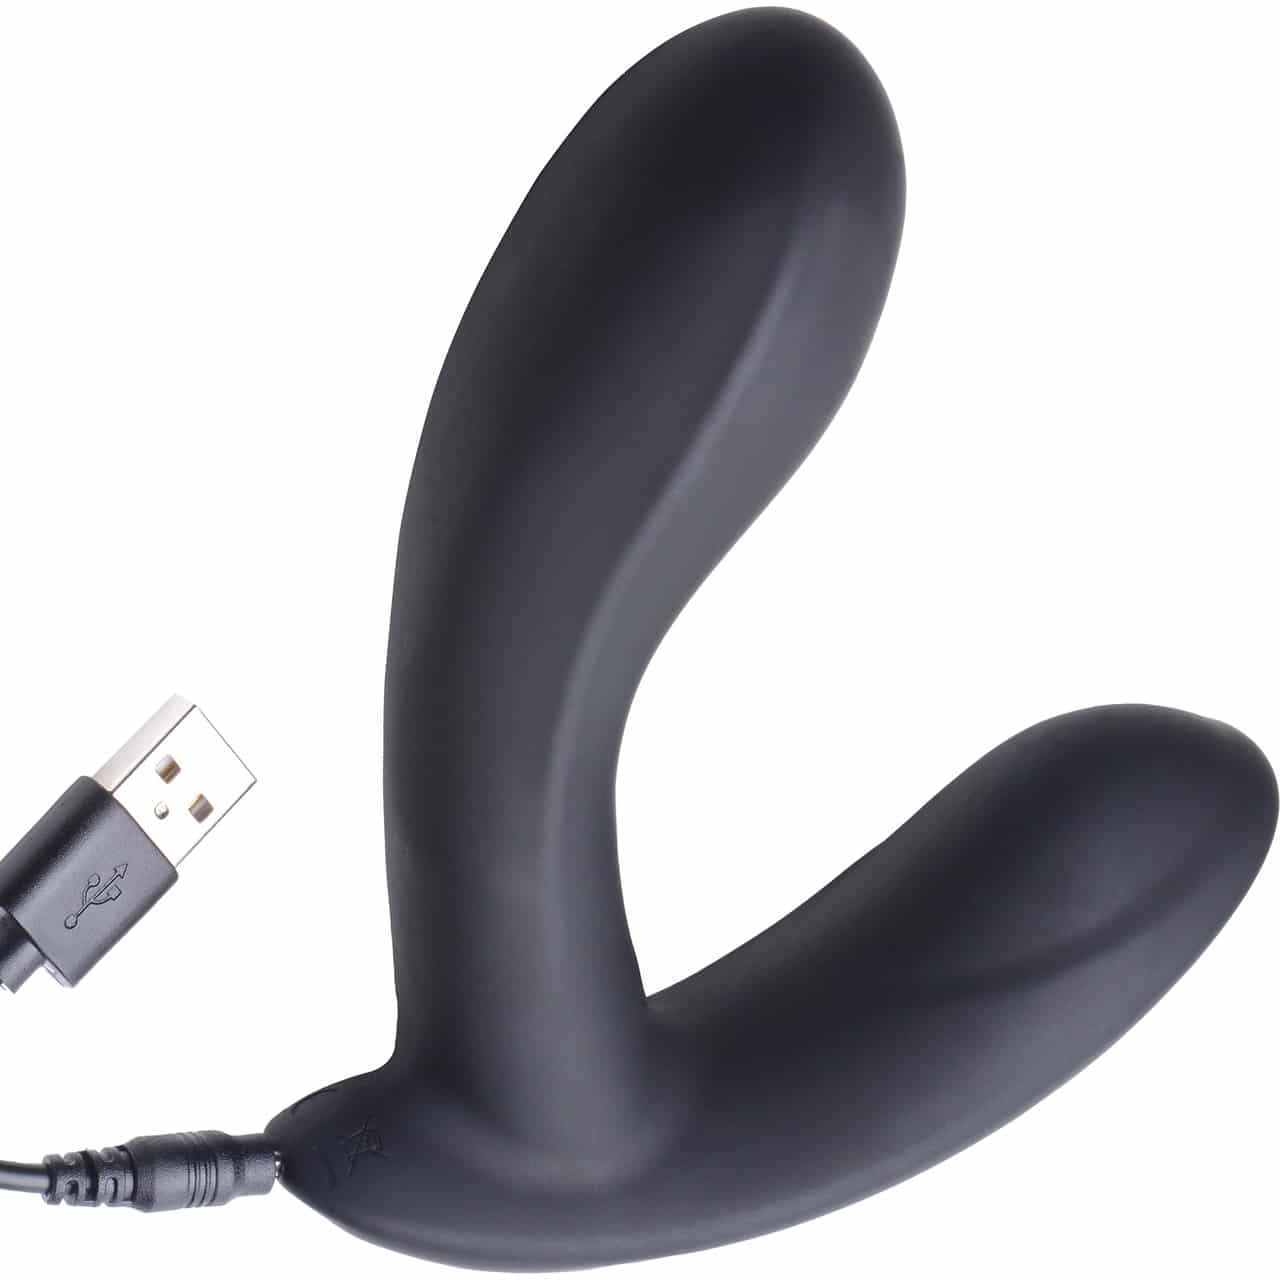 The 7 Best Electric Prostate Stimulation Devices for Shocking P-Spot Pleasure picture